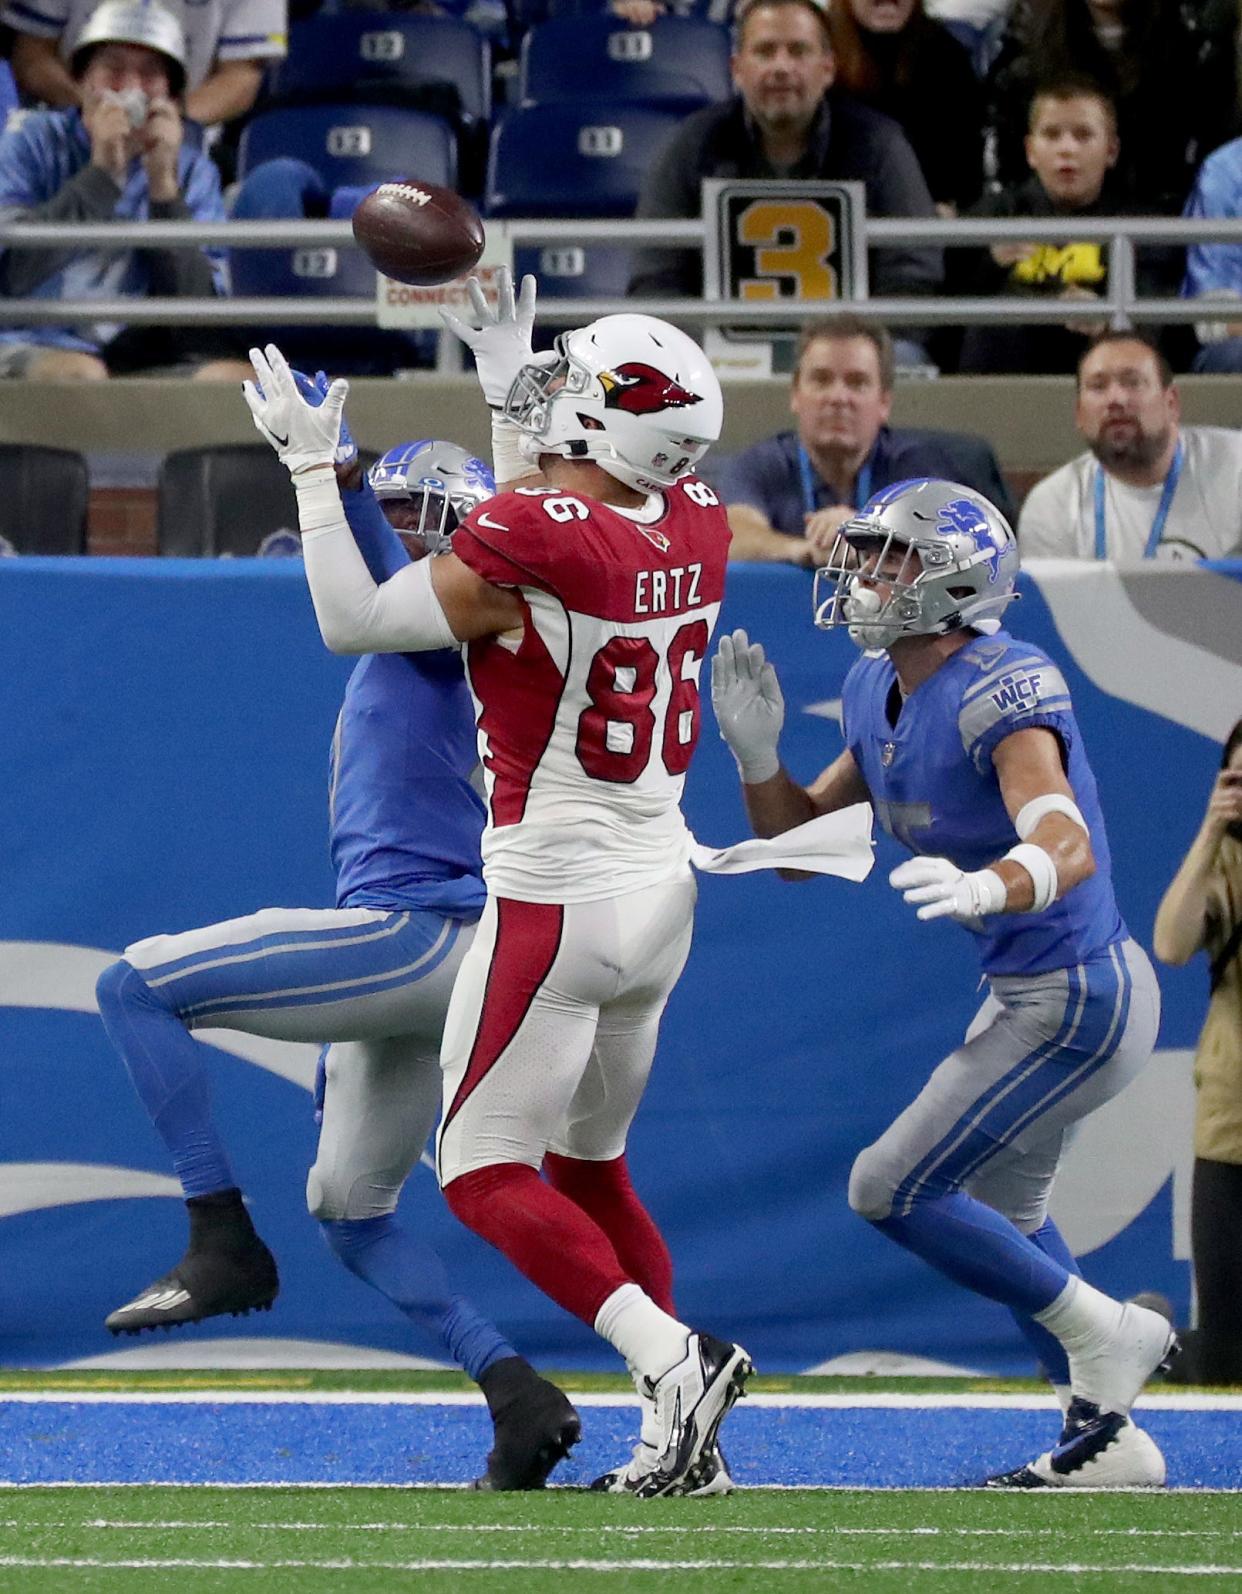 Zach Ertz, then with the Arizona Cardinals, tries to catch a pass against the Lions during the 2021 season at Ford Field.